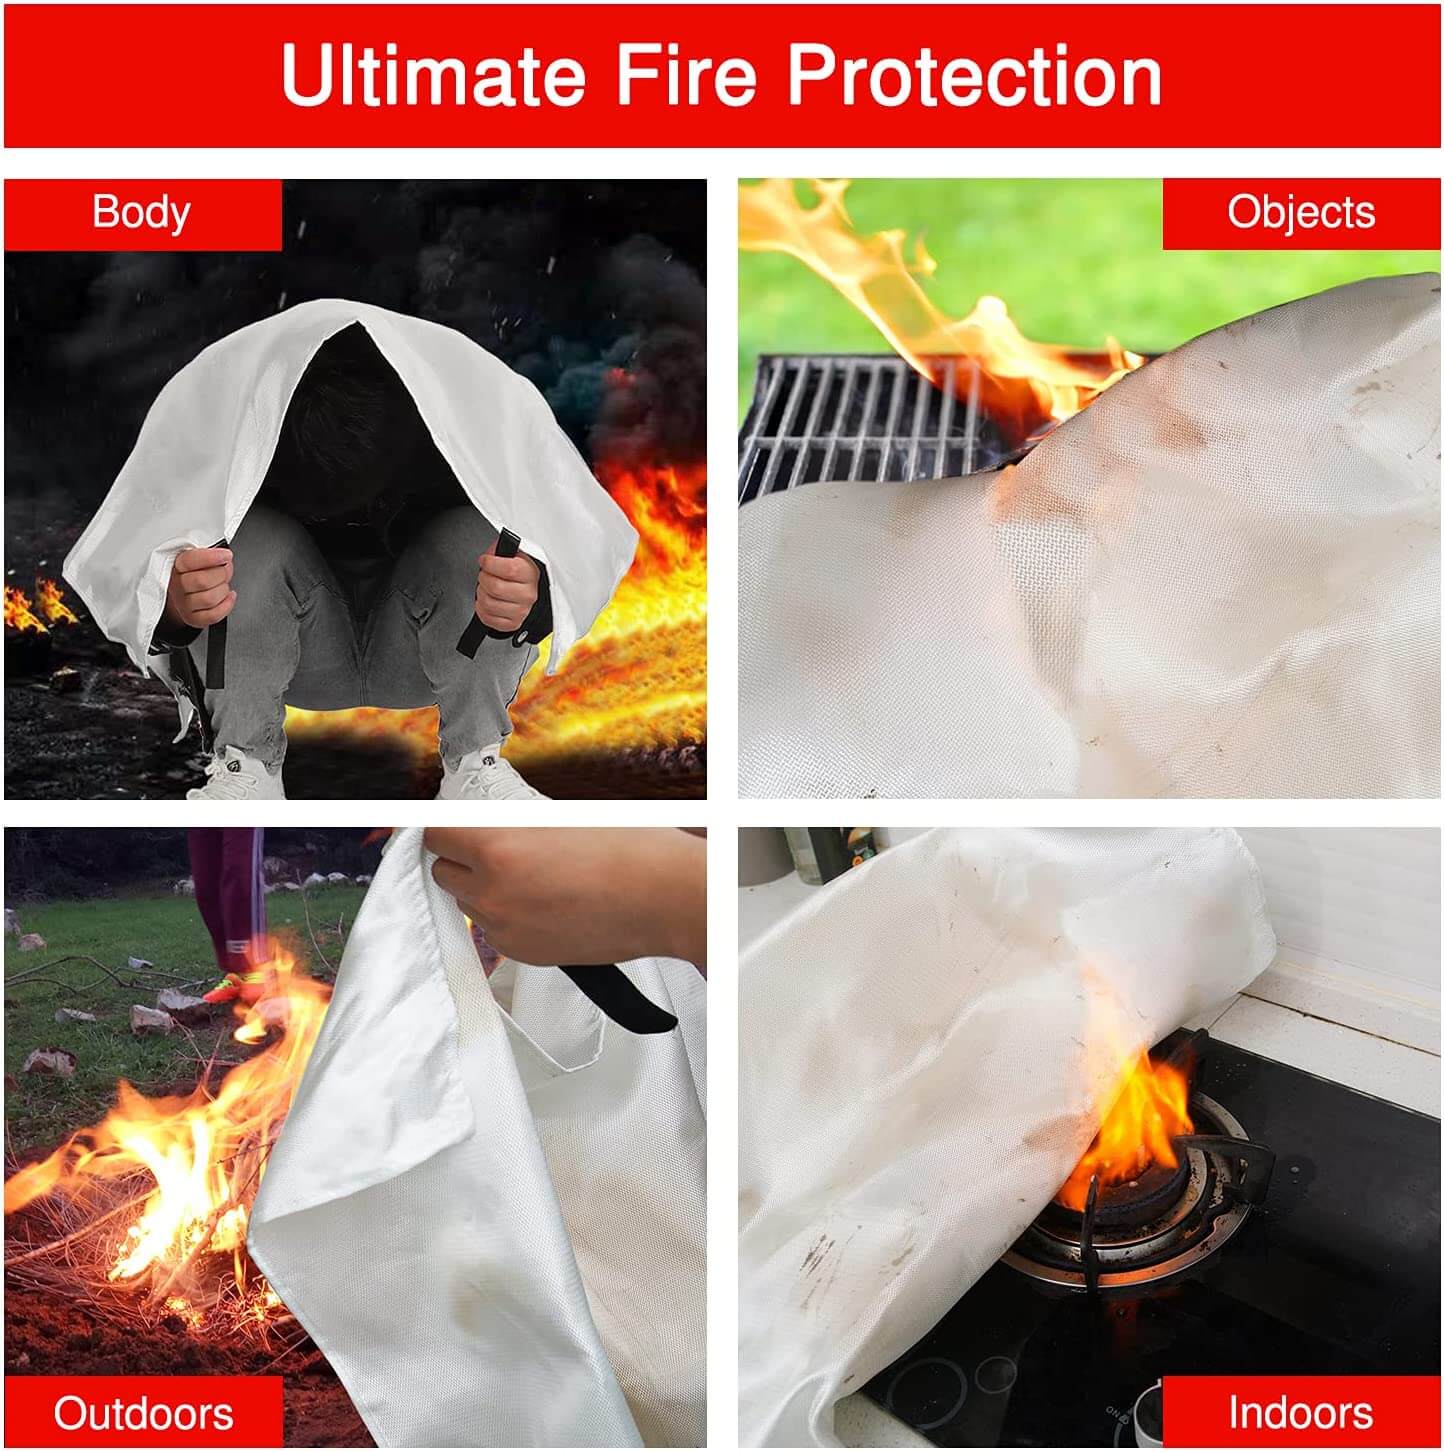 4 Scenarios for Using the Emergency Fire Blanket